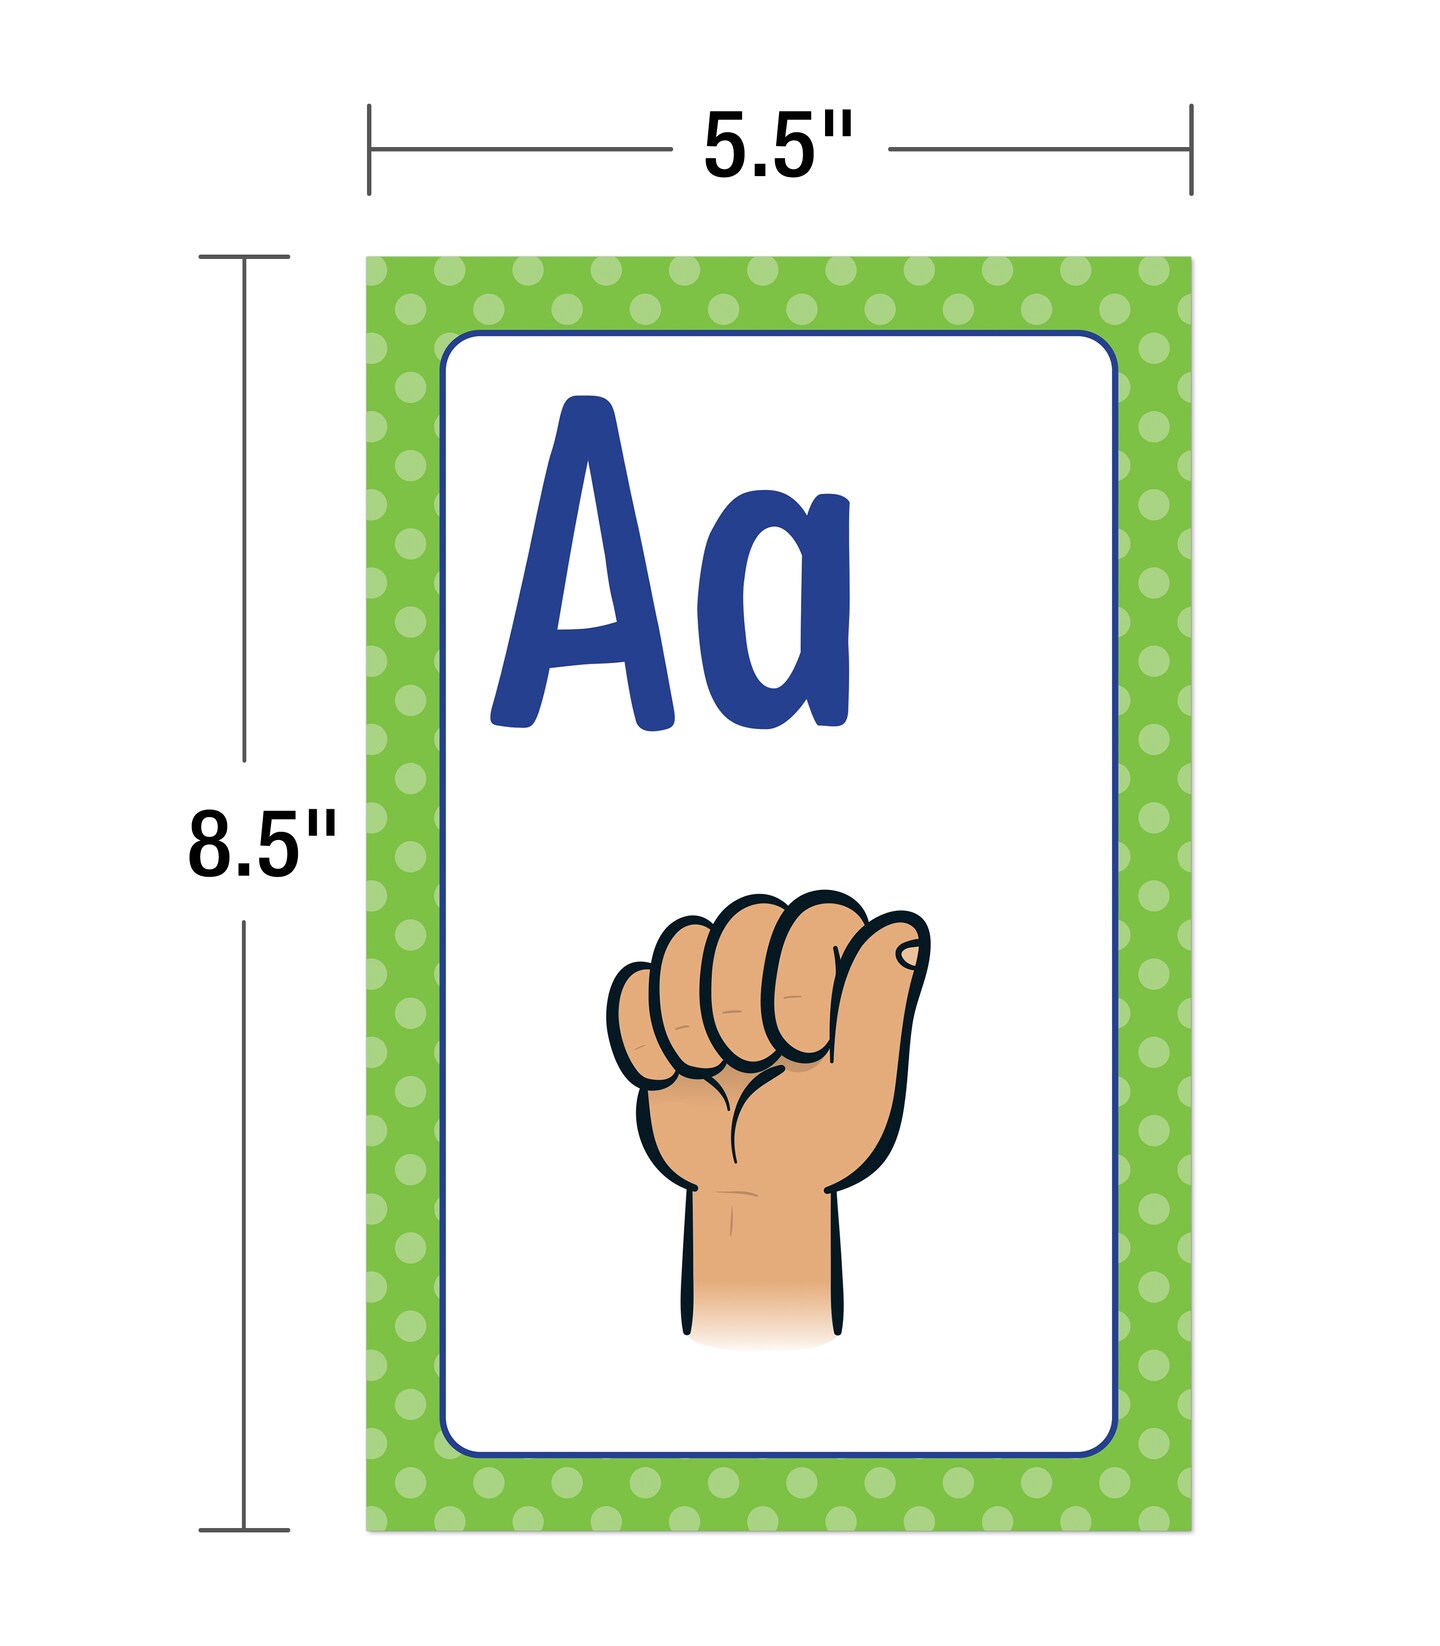 Carson Dellosa Sign Language Posters, ASL Alphabet Learning American Sign Language Posters With Hand Signs, Alphabet Cards for Bulletin Board, Classroom Decor, Classroom Curriculum (26 Posters)